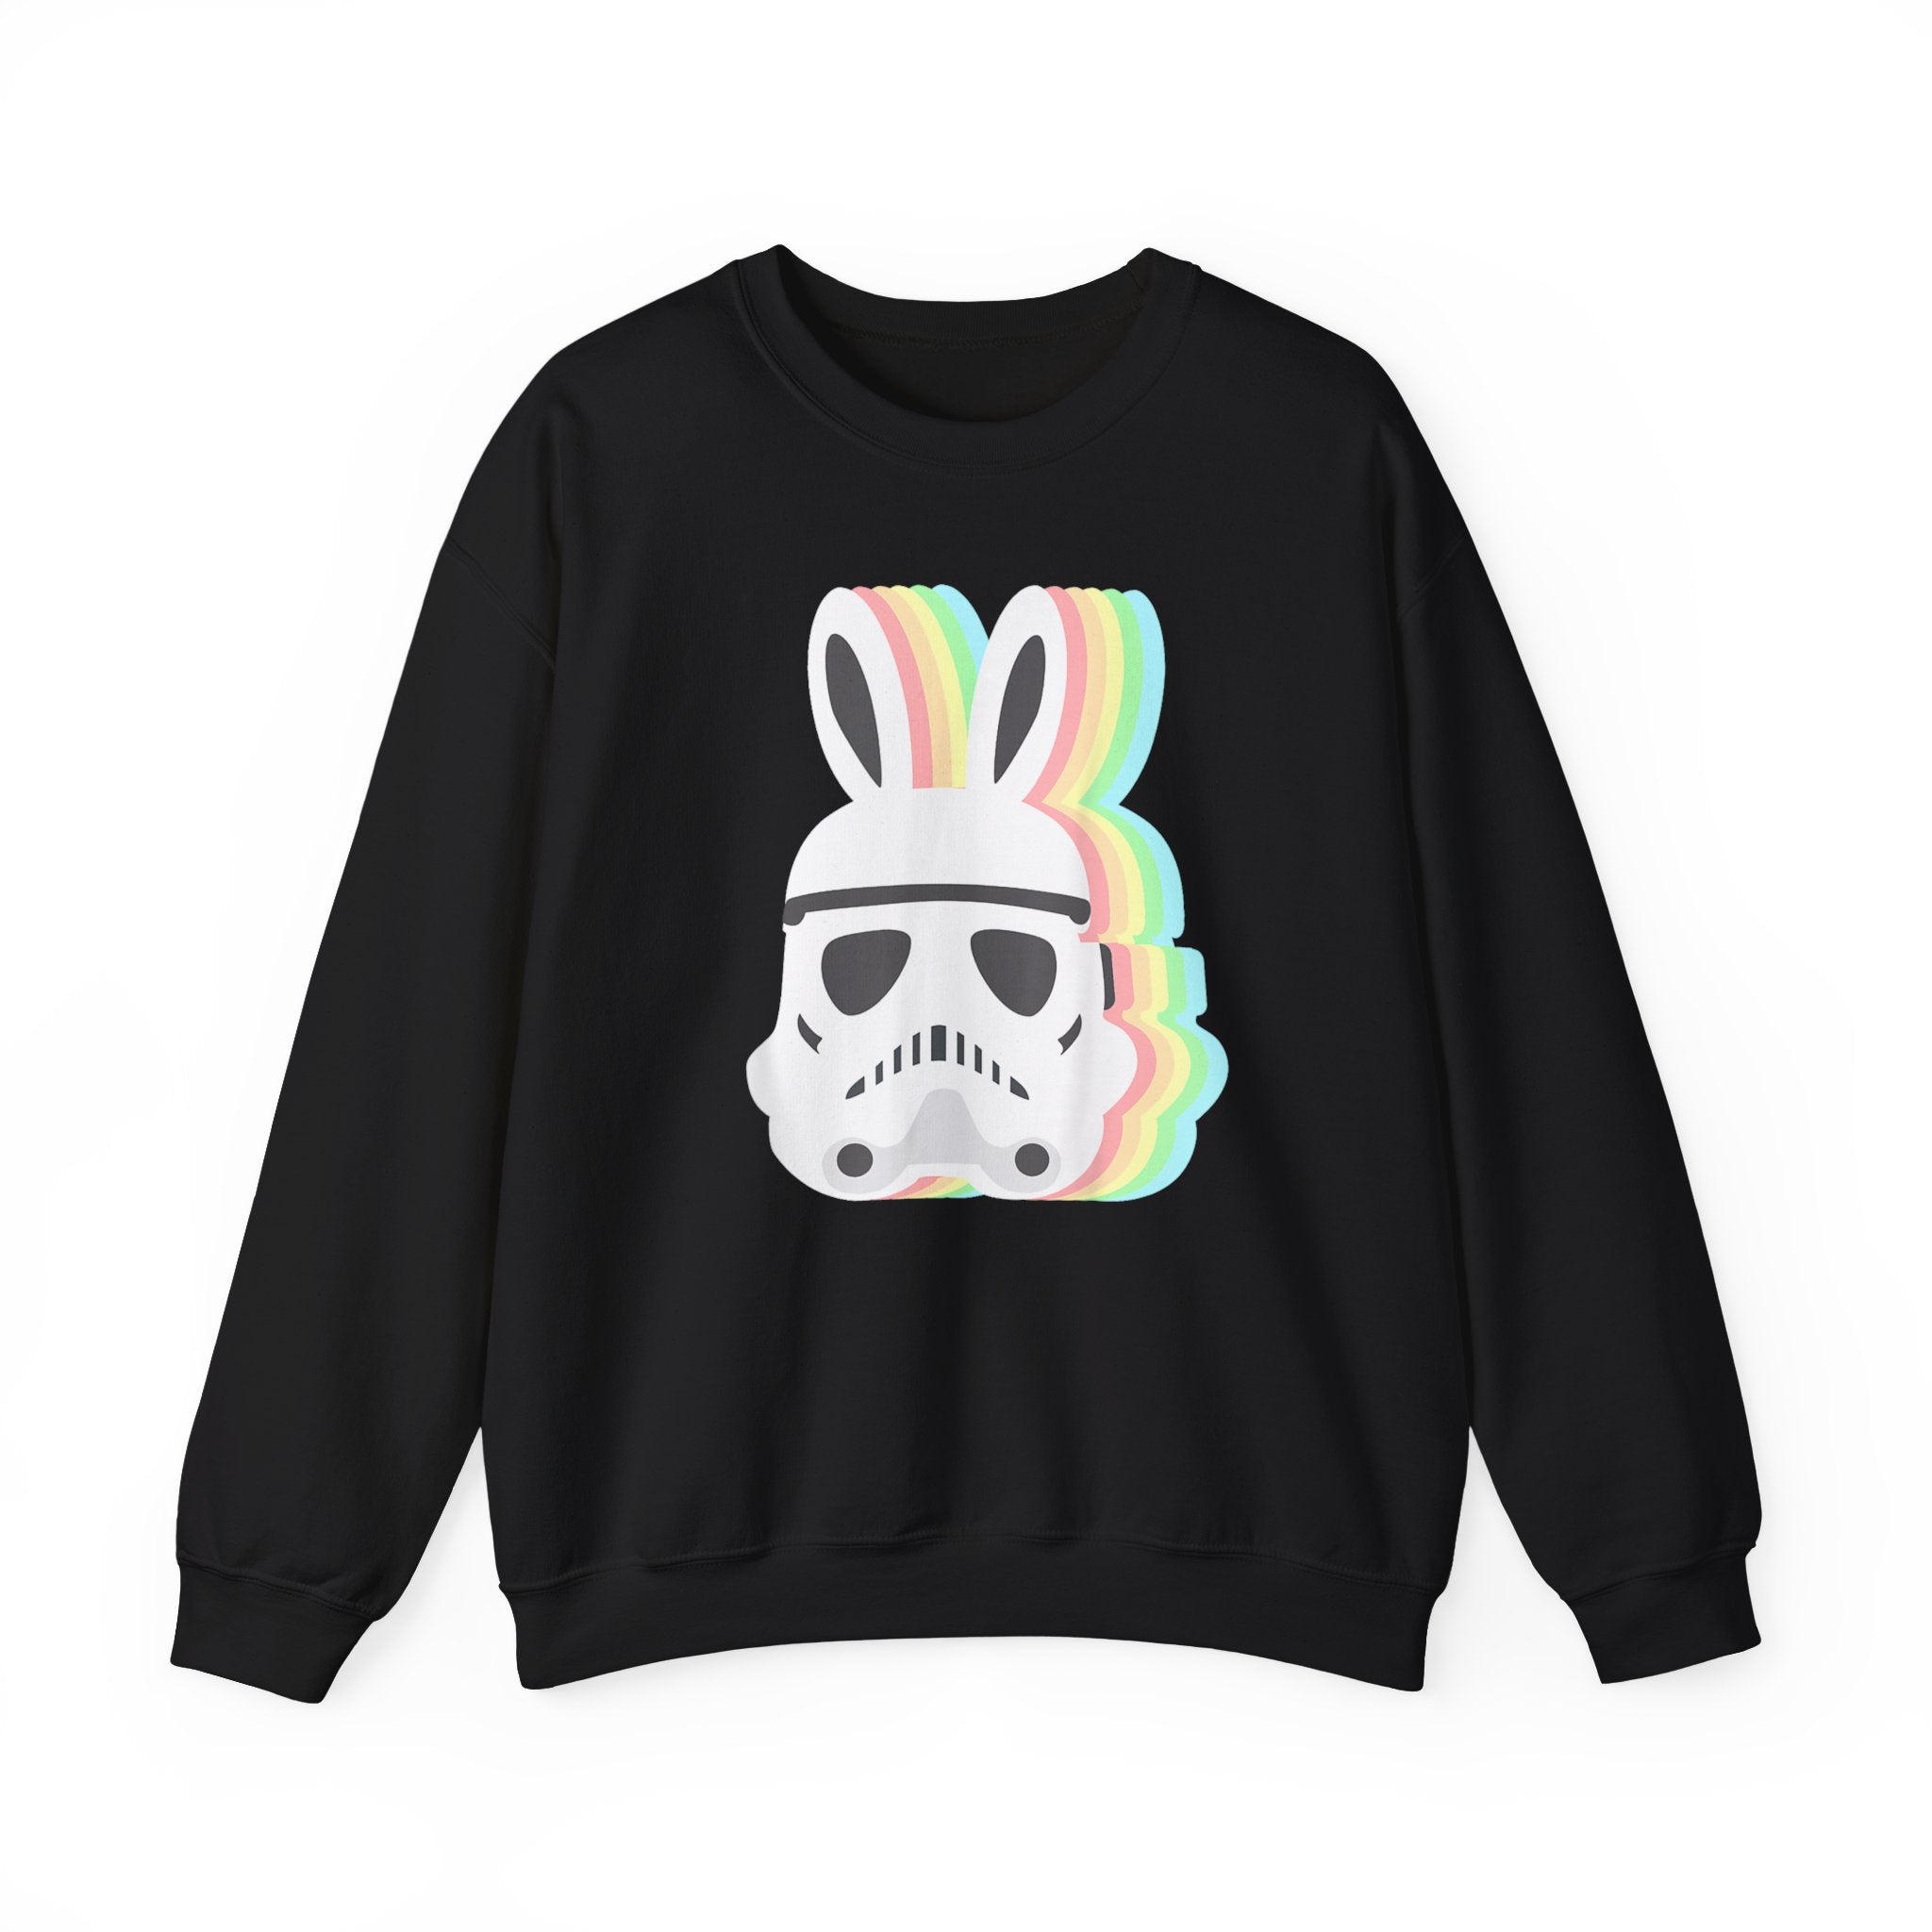 Stay warm in the colder months with this cozy Star Wars Easter Stormtrooper - Sweatshirt featuring an Easter Stormtrooper graphic adorned with colorful bunny ears.